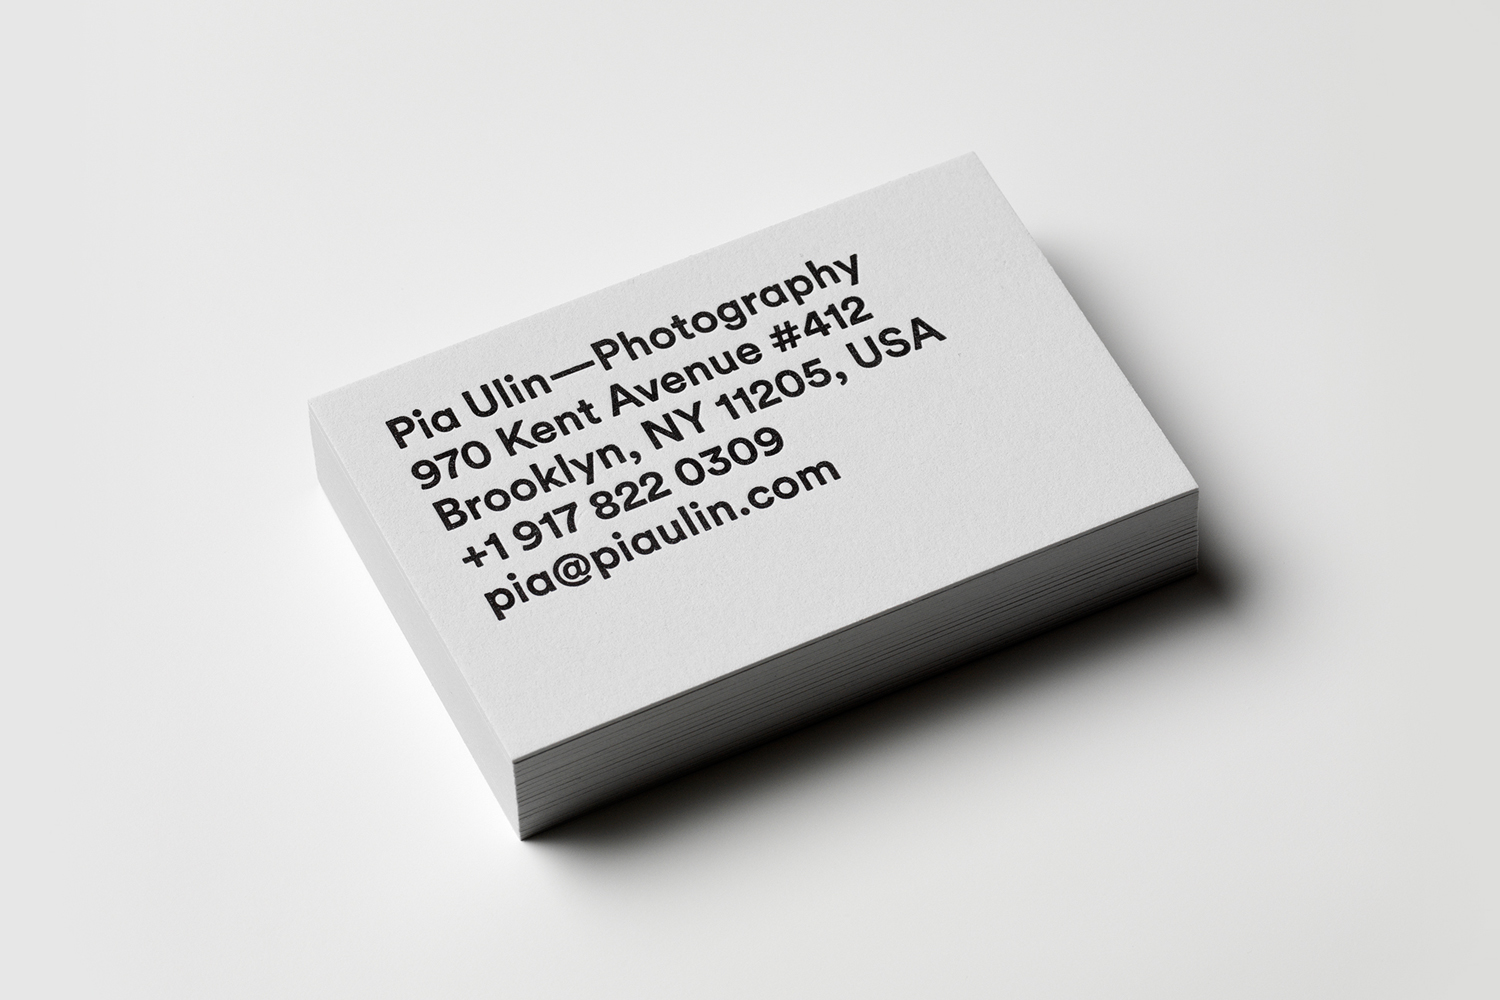 Brand identity and letterpress business cards for Pia Ulin Photography by The Studio, Sweden